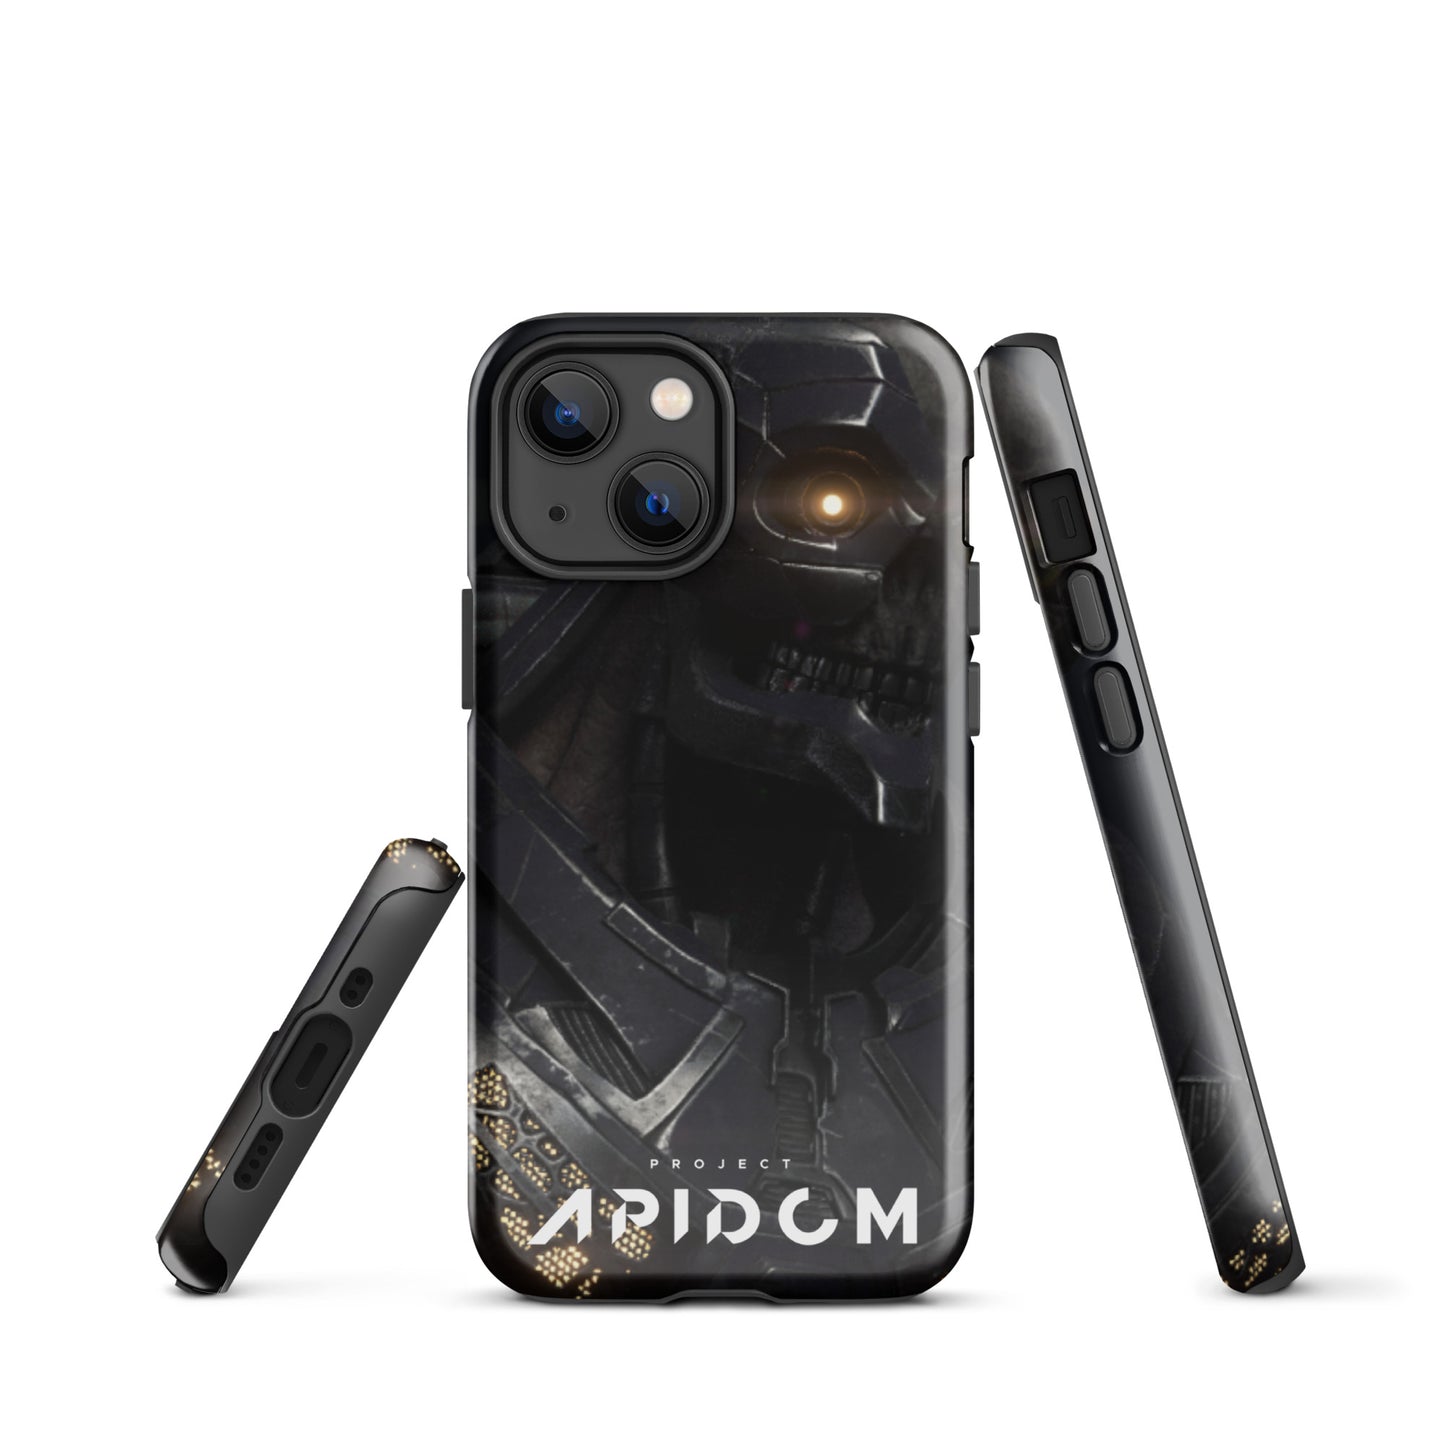 Project Apidom #3 - Tough Case for iPhone®